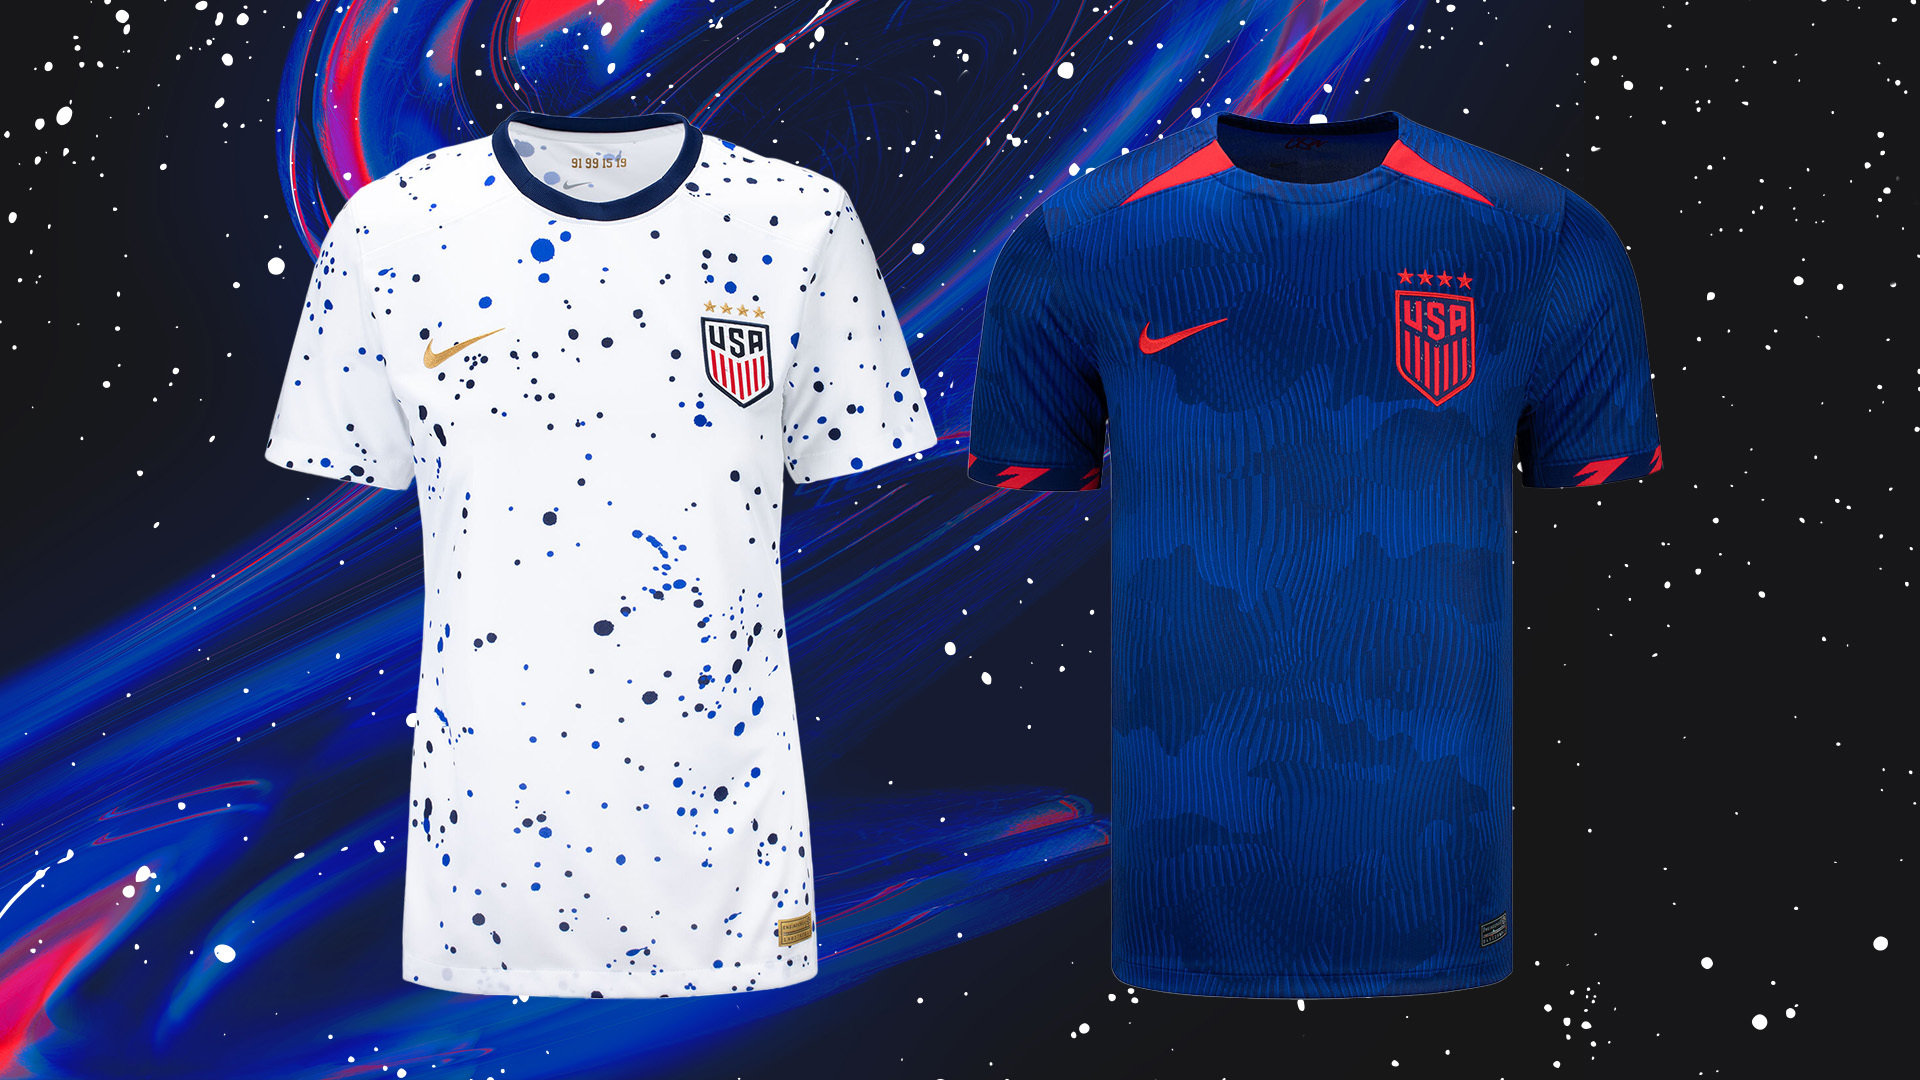 U.S. Soccer And Nike Reveal New 2023 Home And Away Uniforms Ahead Of